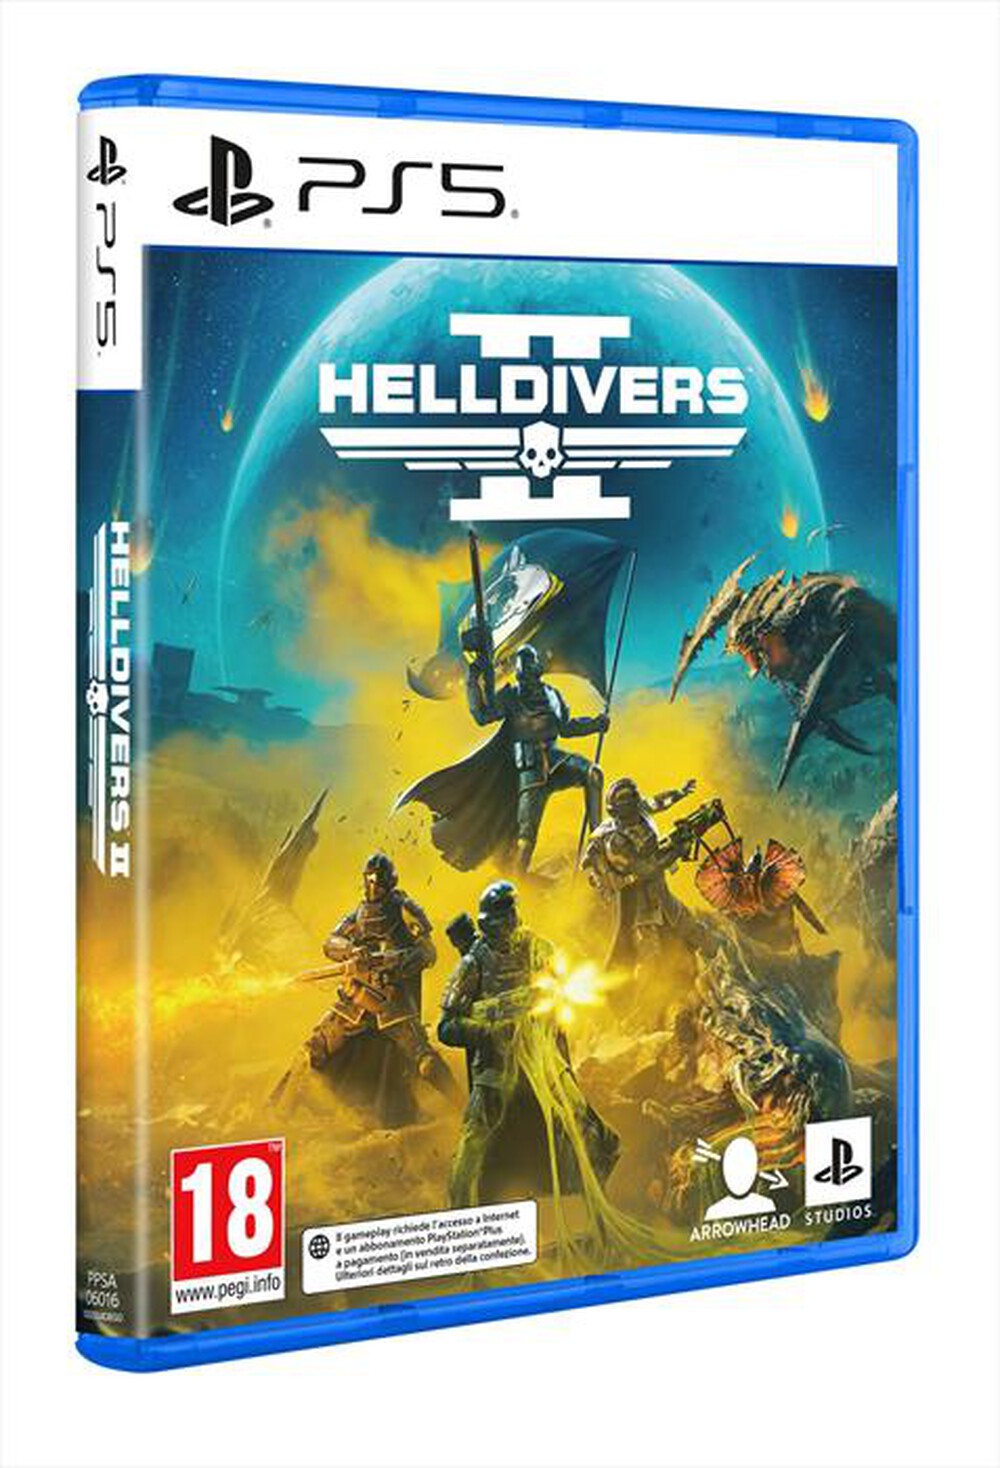 "SONY COMPUTER - HELLDIVERS 2 PS5"